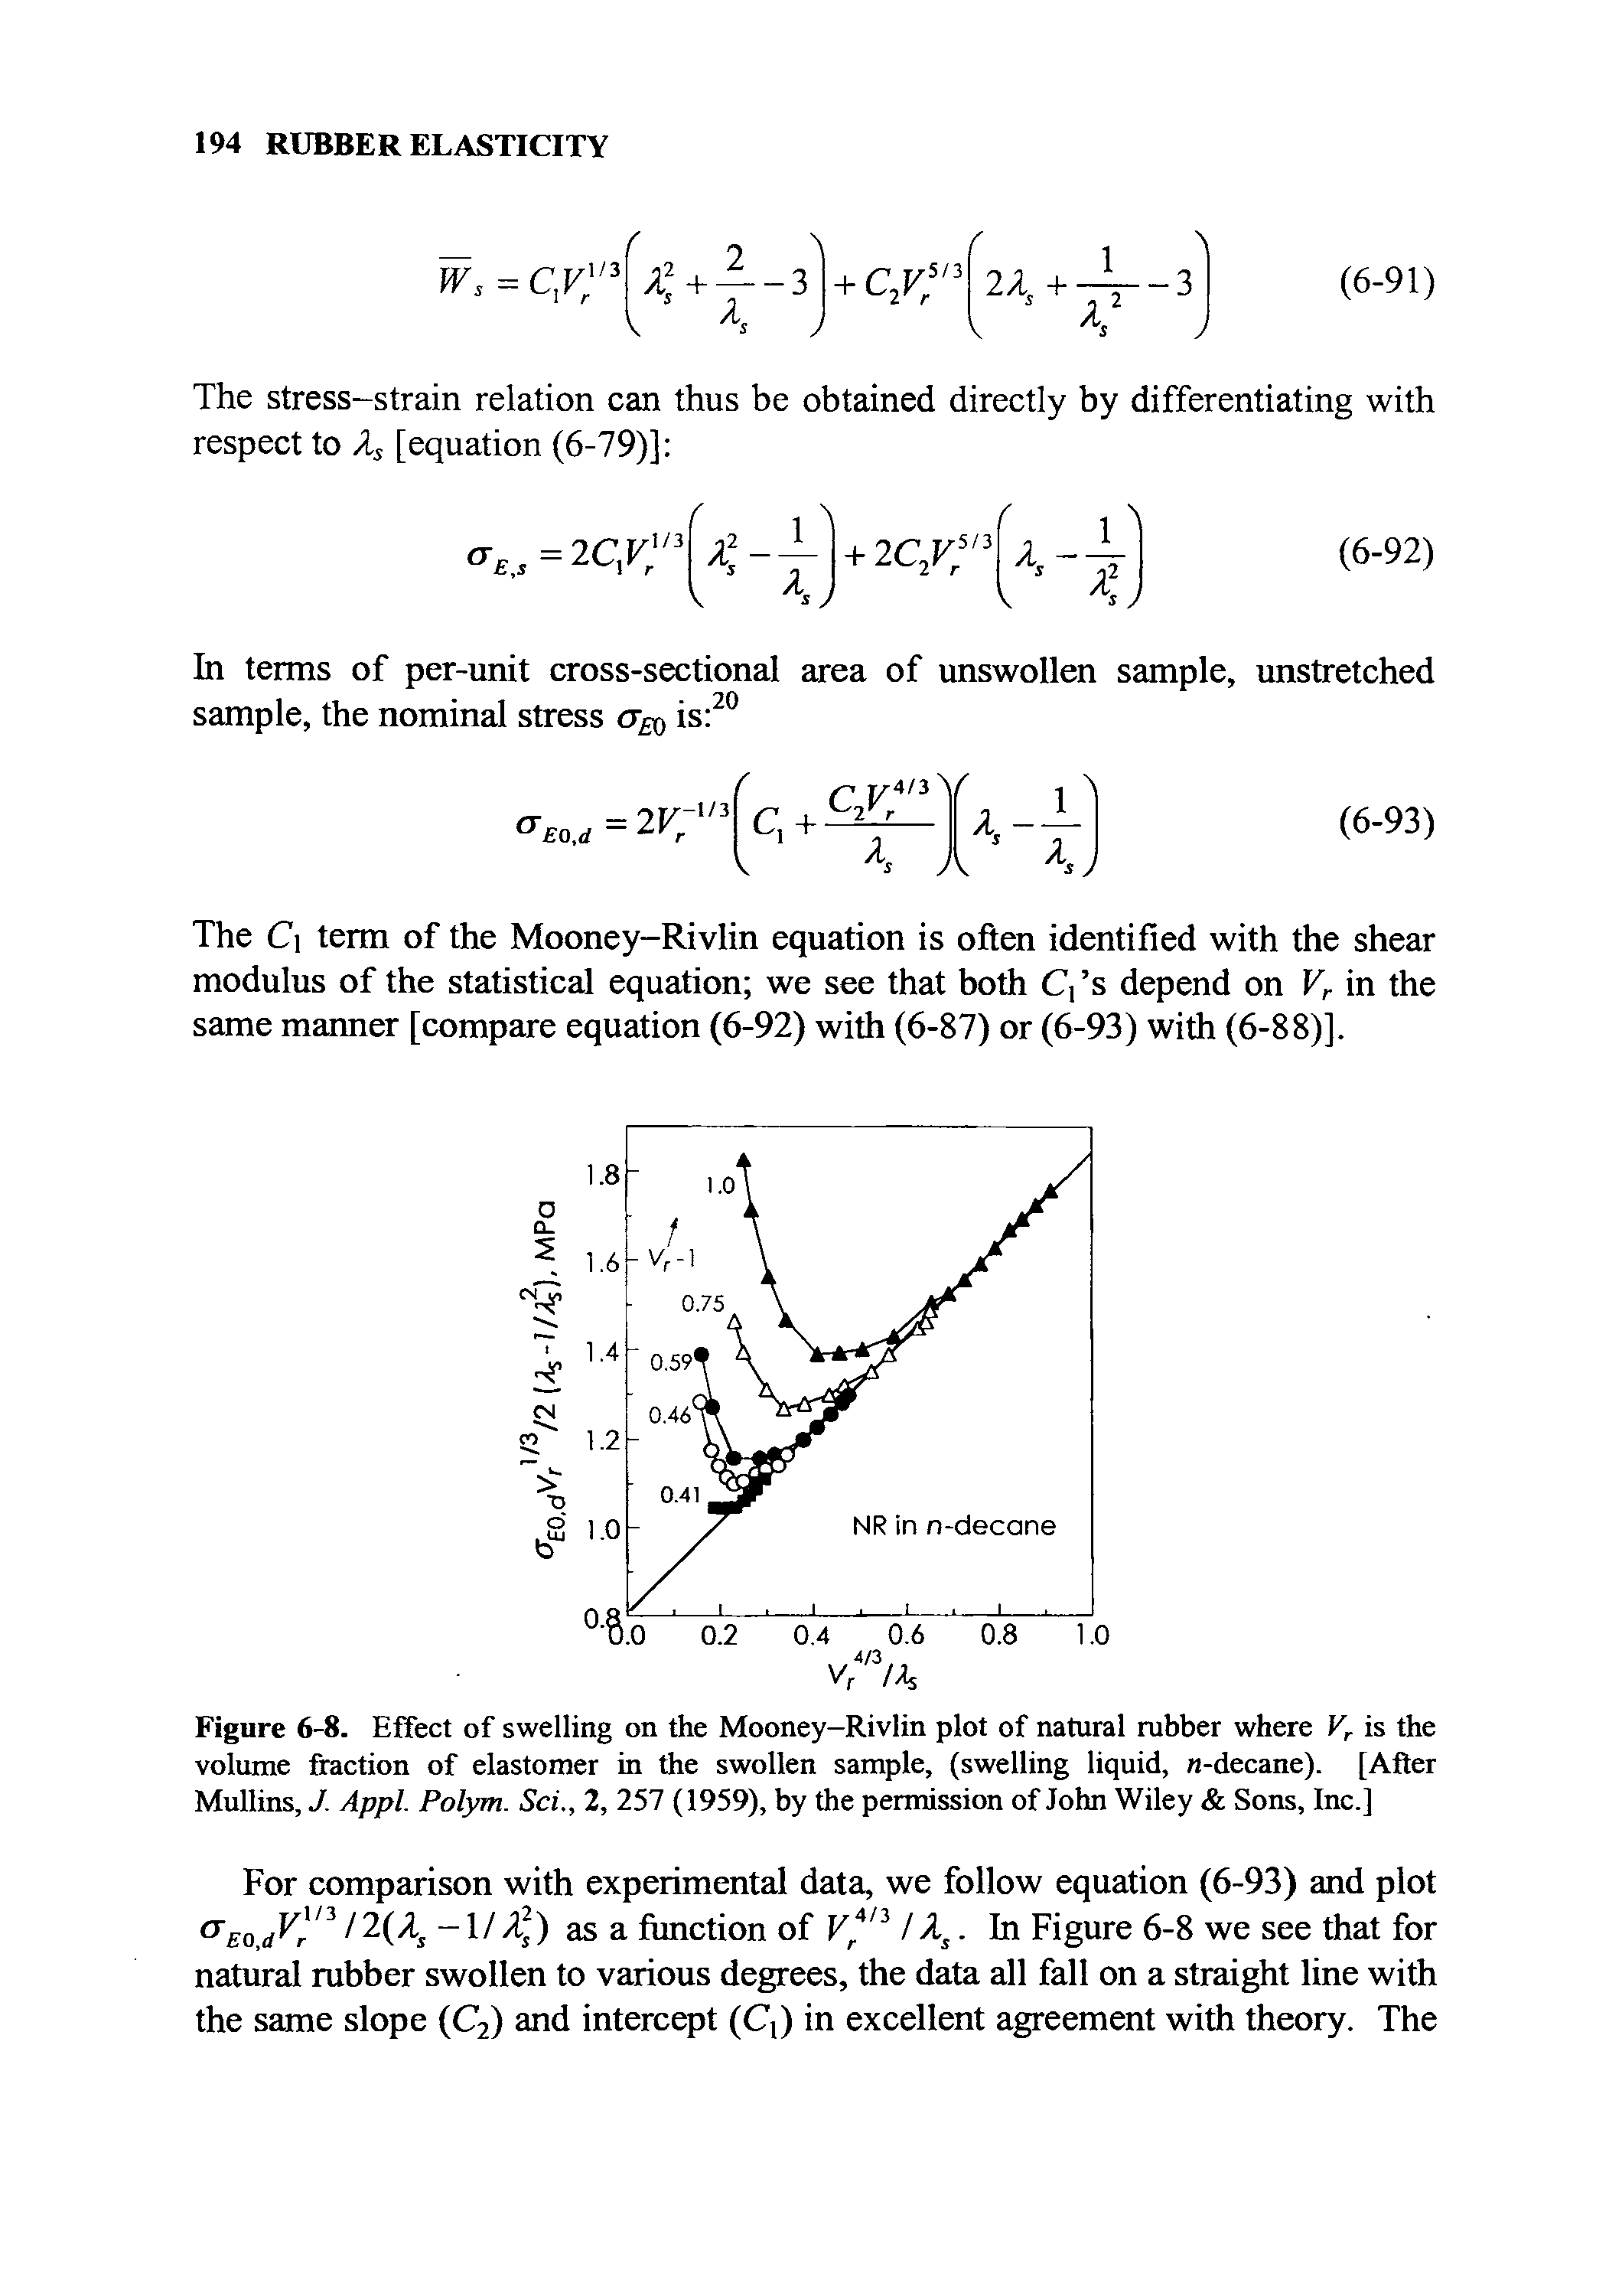 Figure 6-8. Effect of swelling on the Mooney-Rivlin plot of natural rubber where Vr is the volume fraction of elastomer in the swollen sample, (swelling liquid, n-decane). [After Mullins, J. Appl. Polym. Sci., 2, 257 (1959), by the permission of John Wiley Sons, Inc.]...